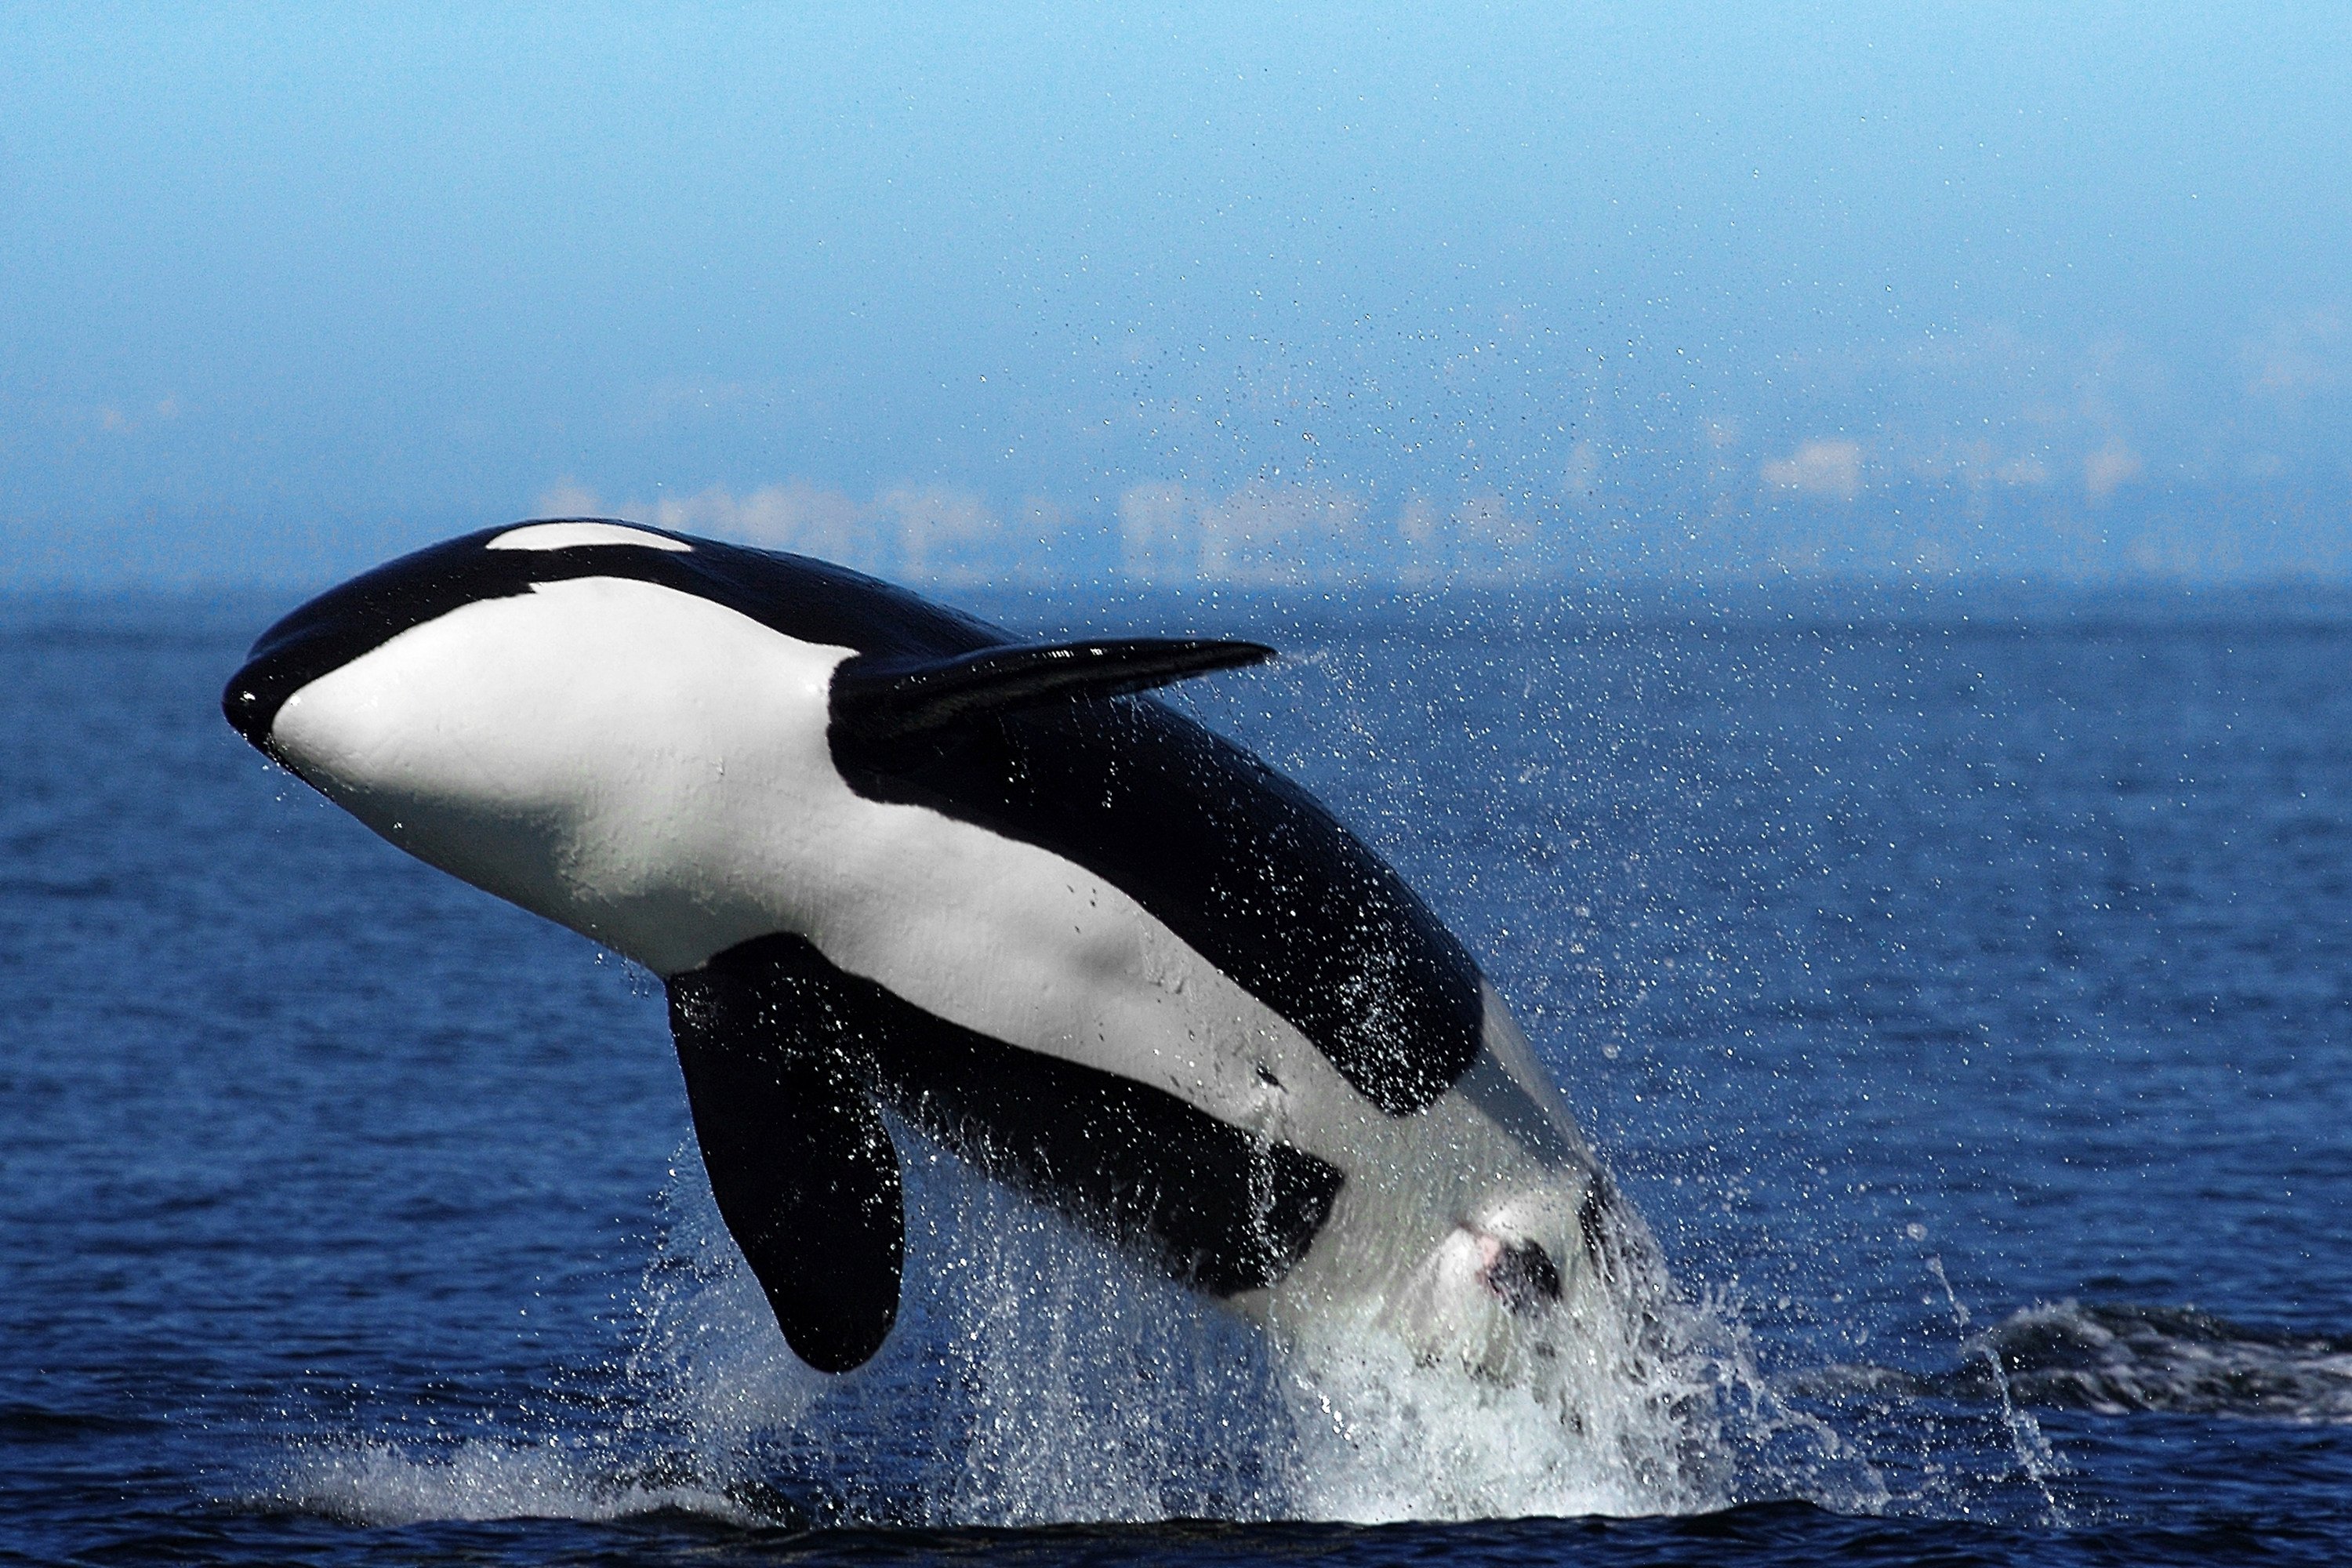 Orcas, the ocean’s apex predator, have been known to prey on killer sharks. File photo: TNS